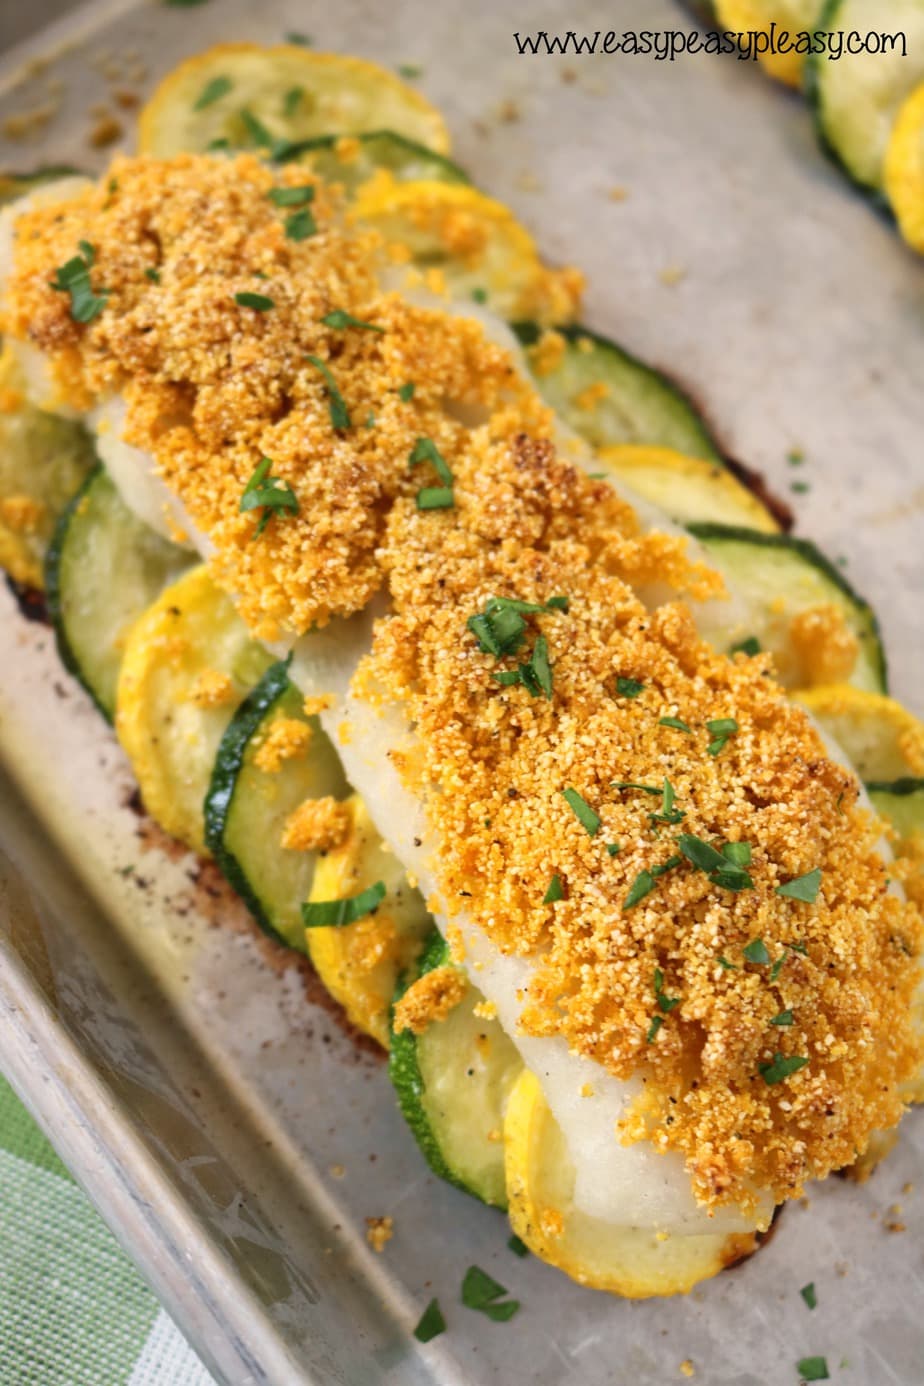 Parmesan Breaded Crappie Recipe over Summer Vegetables is a delicious way to eat crappie.